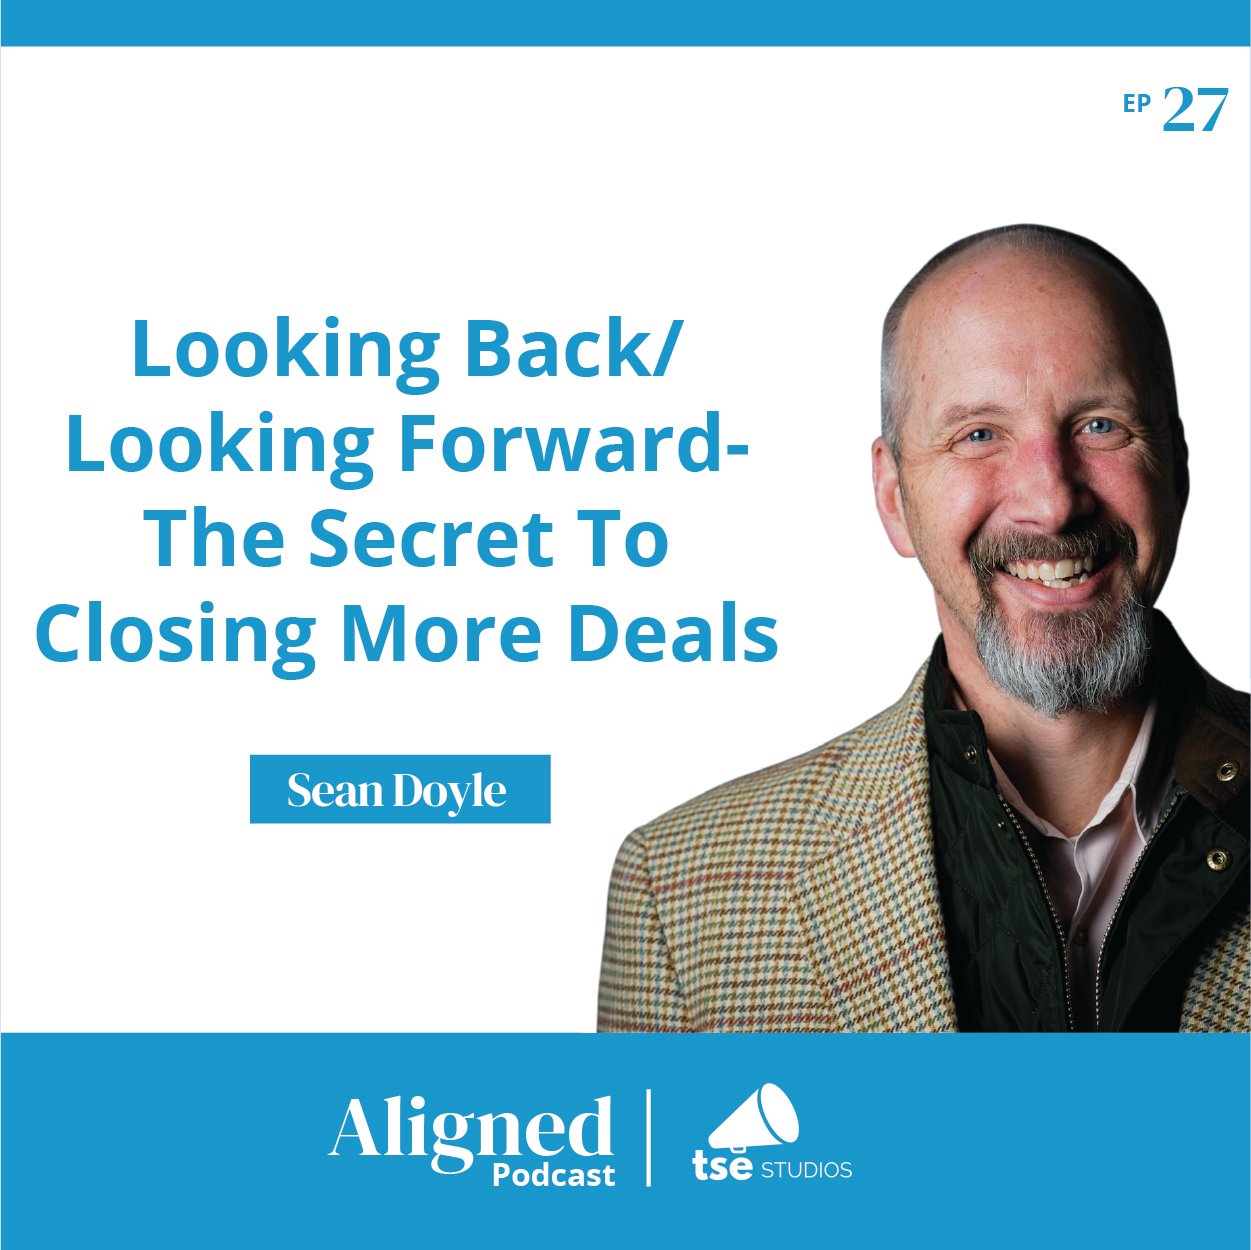 Looking Back/Looking Forward - The Secret To Closing More Deals